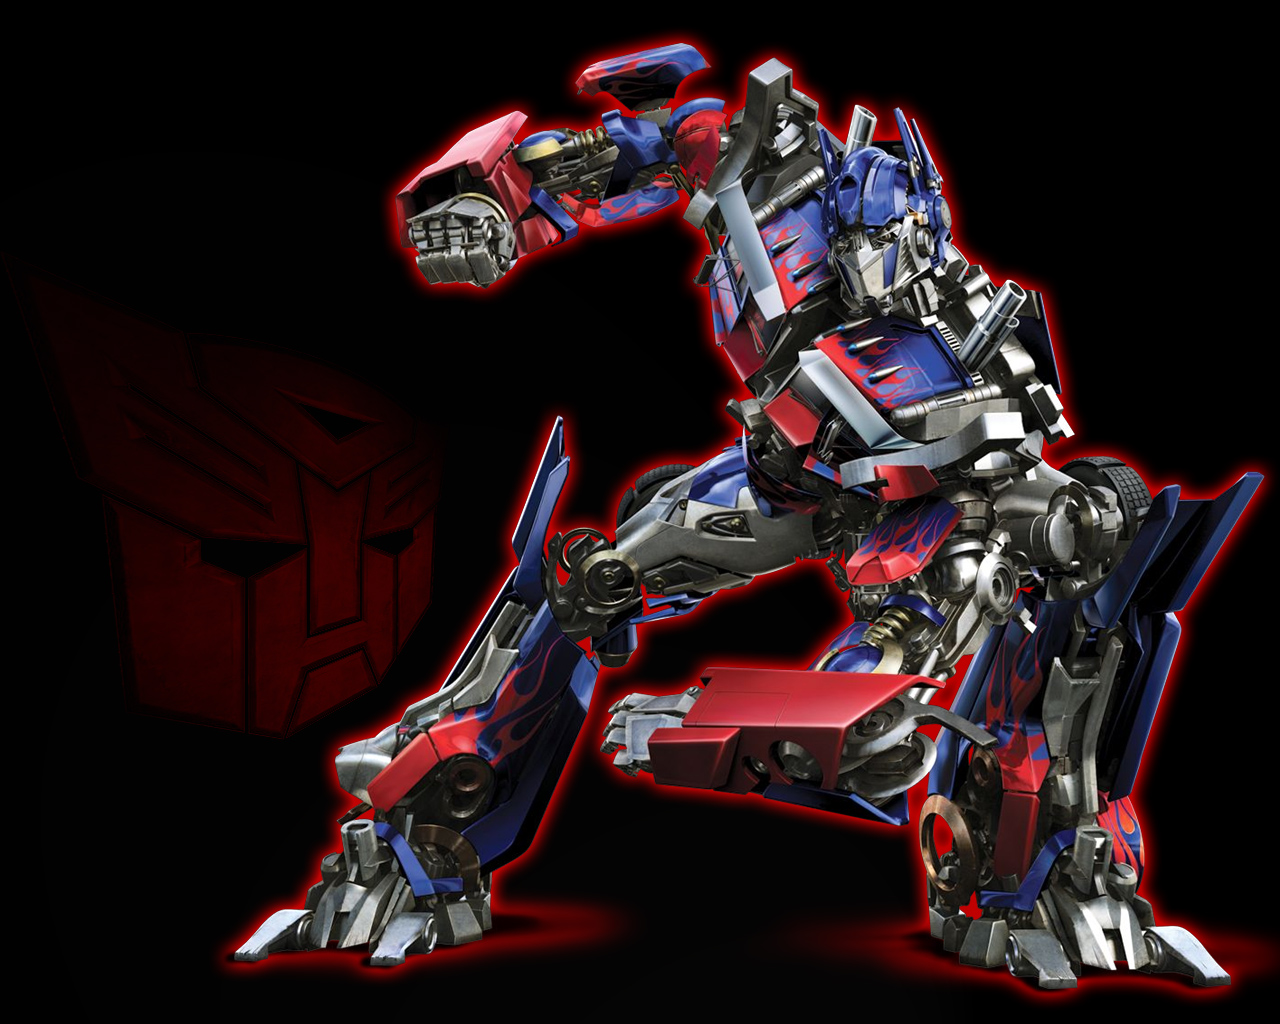 Transformers Optimus Prime Exclusive HD Wallpapers 3732 1280x1024